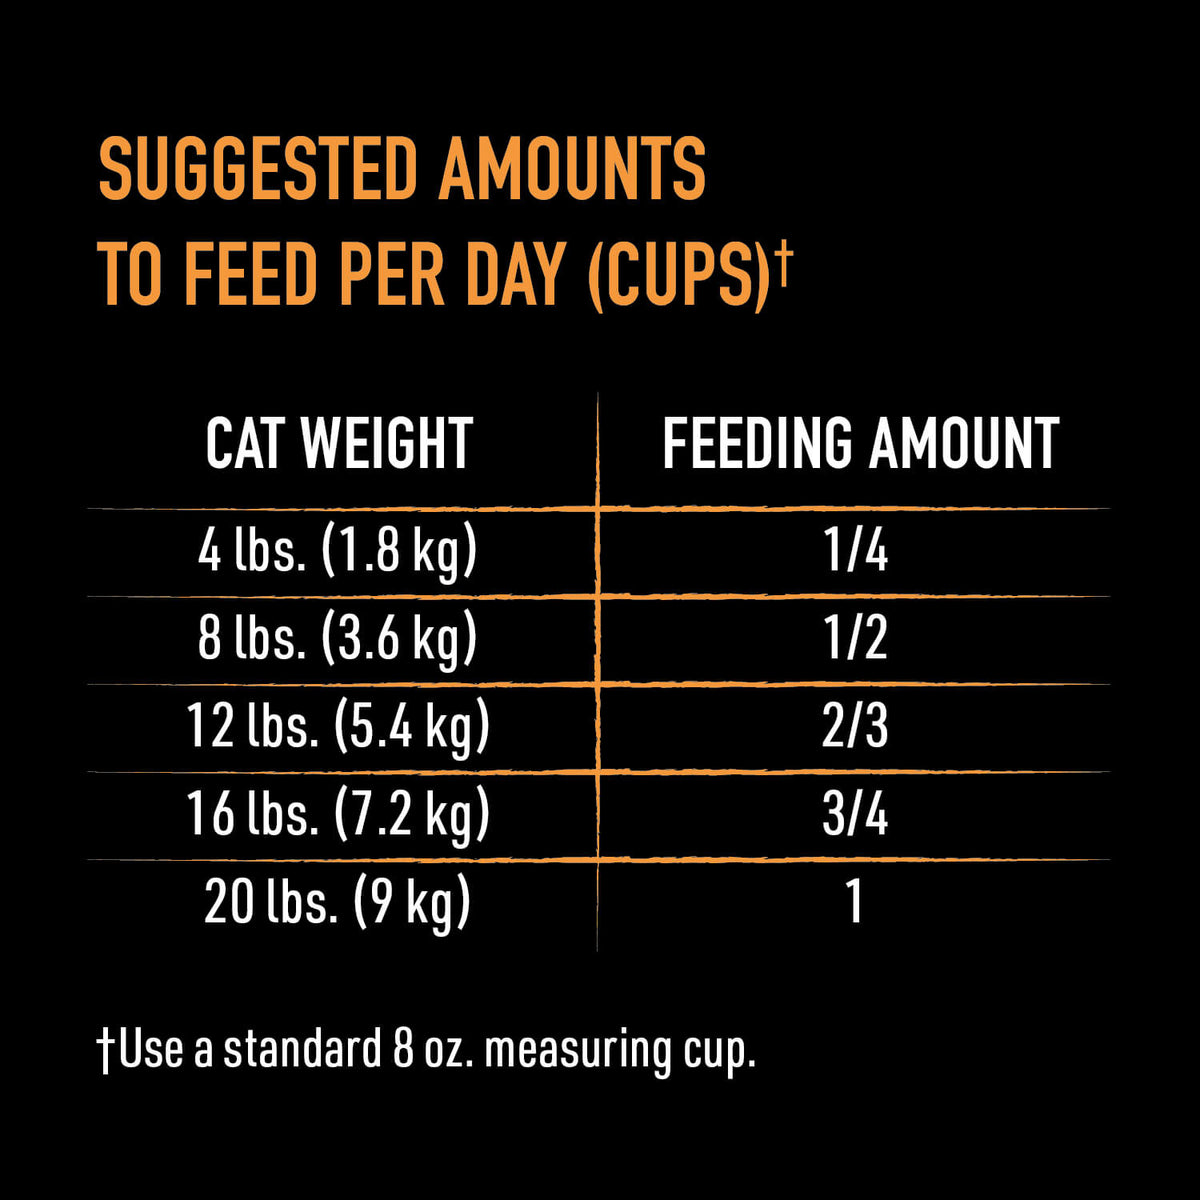 How Many Calories in 1/4 Cup of Dry Cat Food?